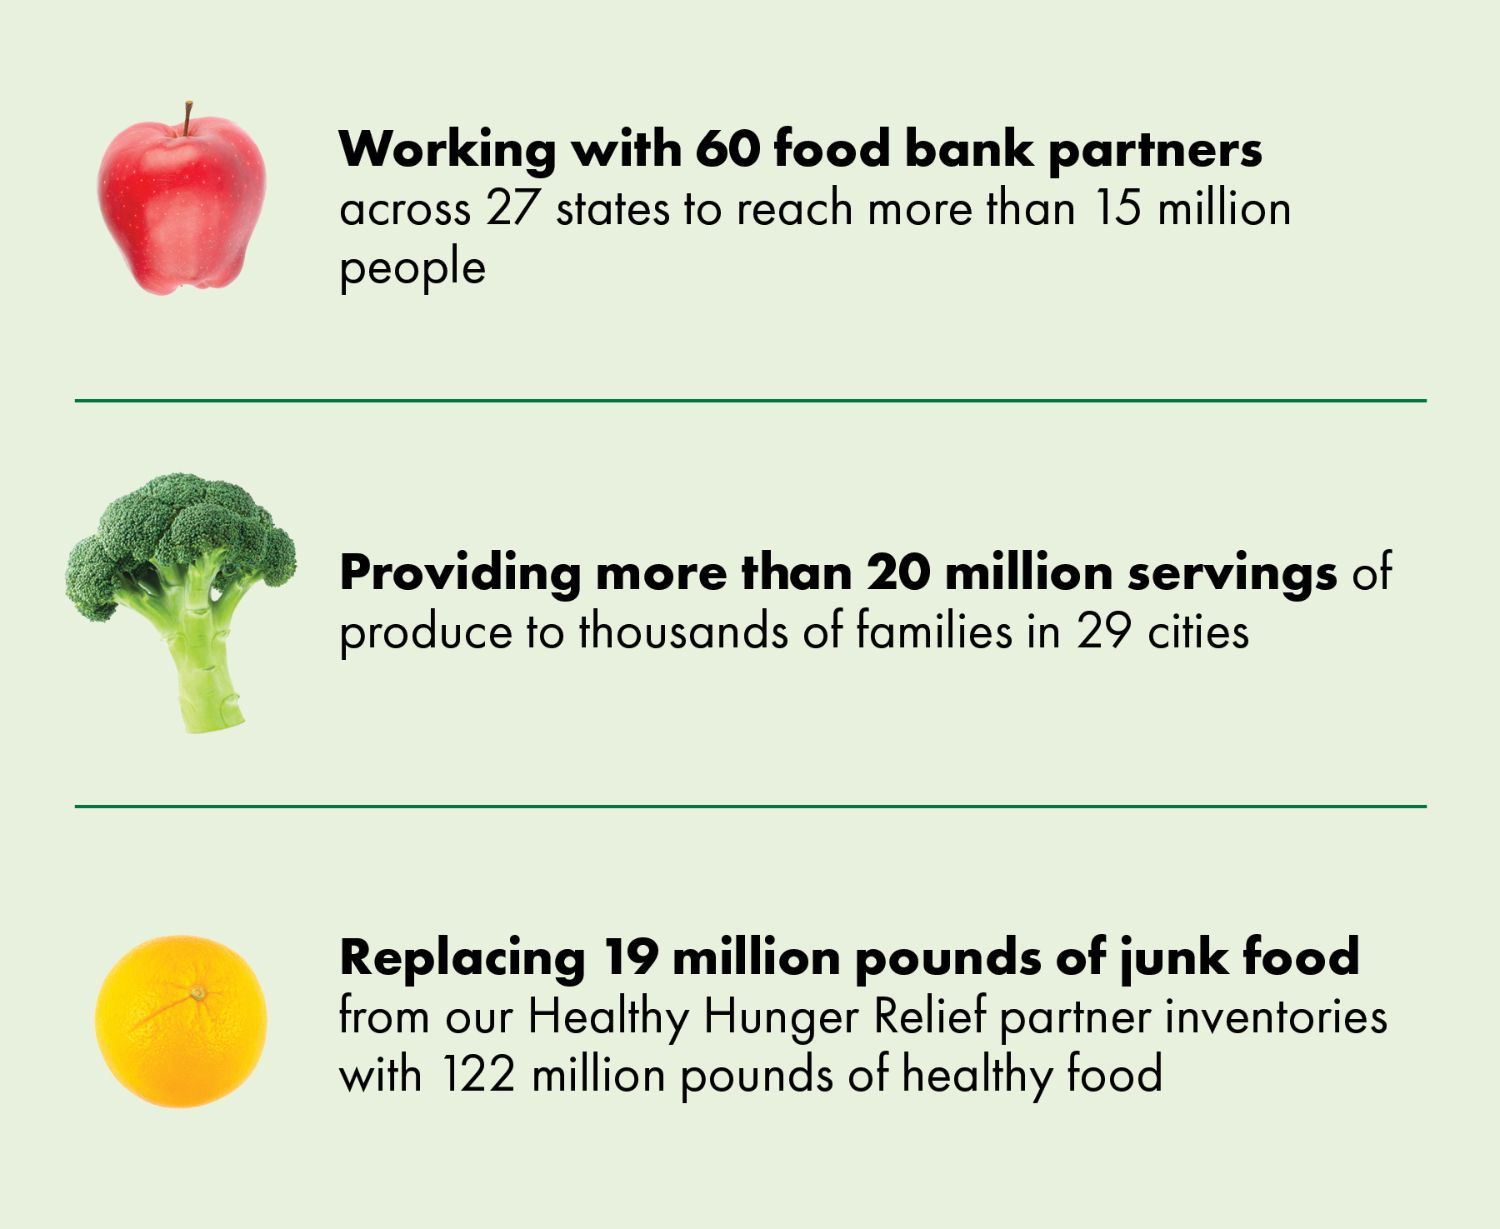 Working with 60 food bank partners across 27 states to reach more than 15 million people, providing more than 20 million servings of produce to thousands of families in 29 cities, replacing 19 million pounds of junk food from our Healthy Hunger Relief partner inventories with 122 million pounds of healthy food.